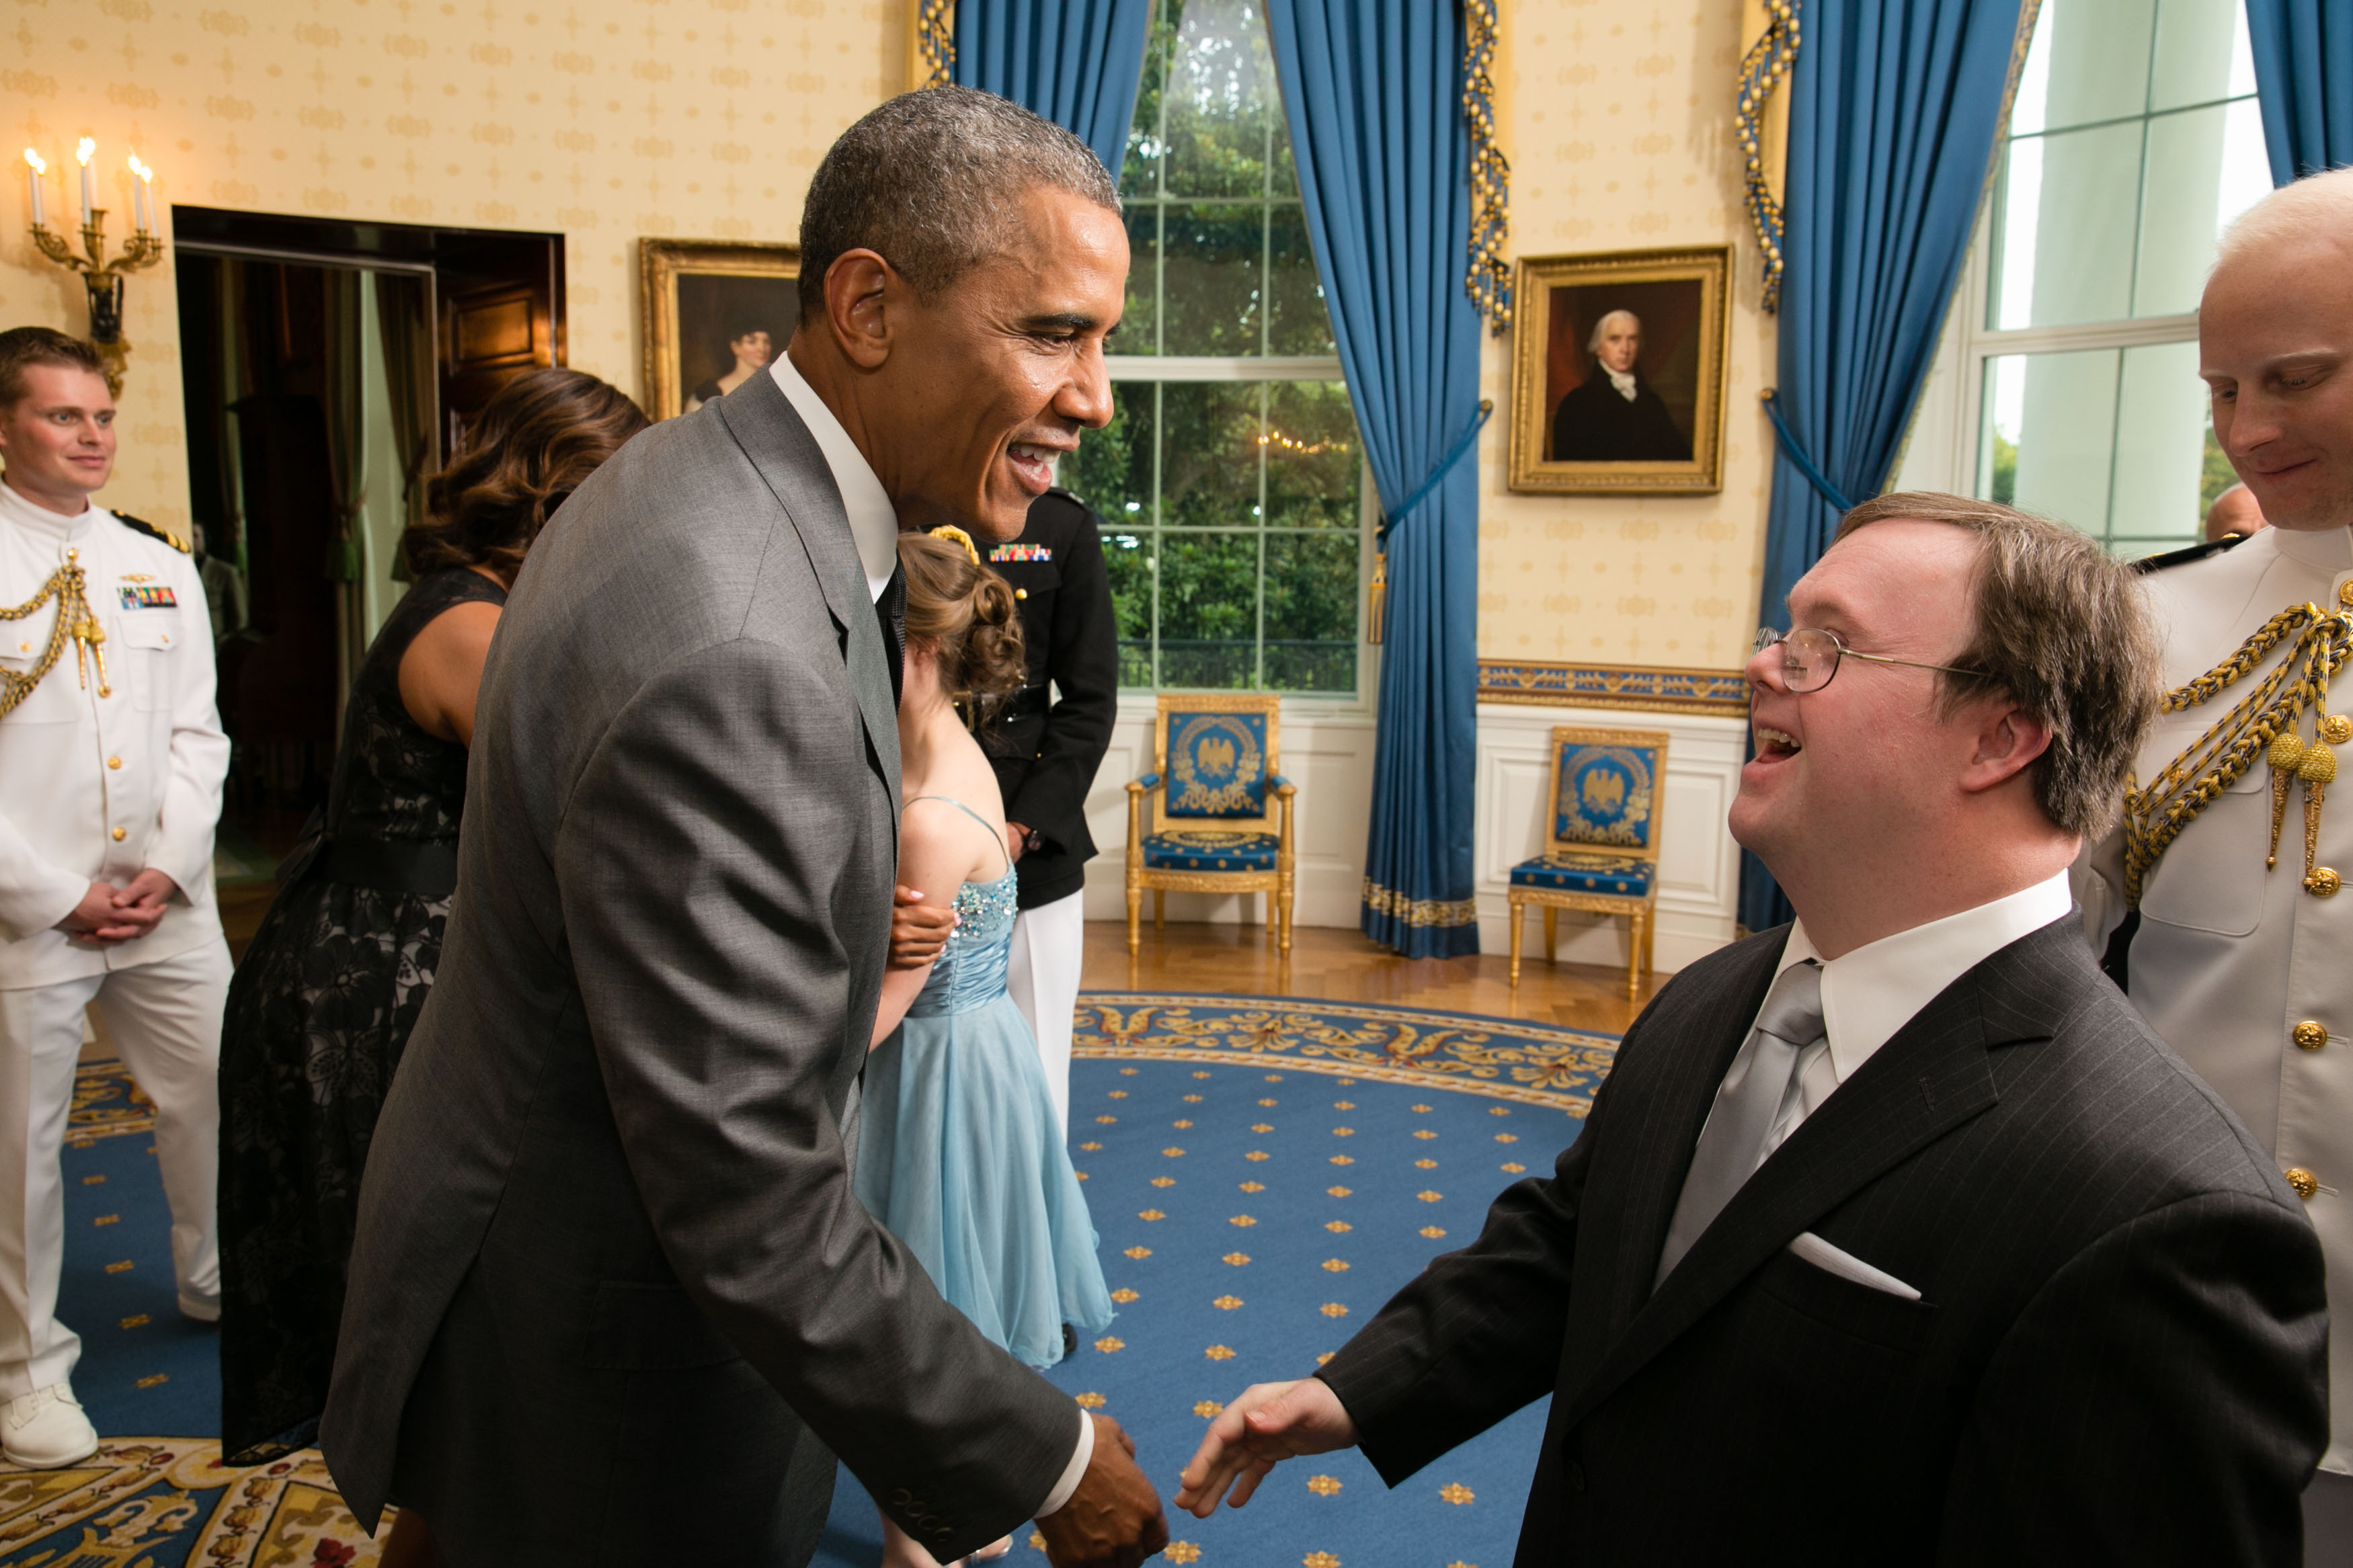 Frank Stephens, a man with Down Syndrome fights his right to live